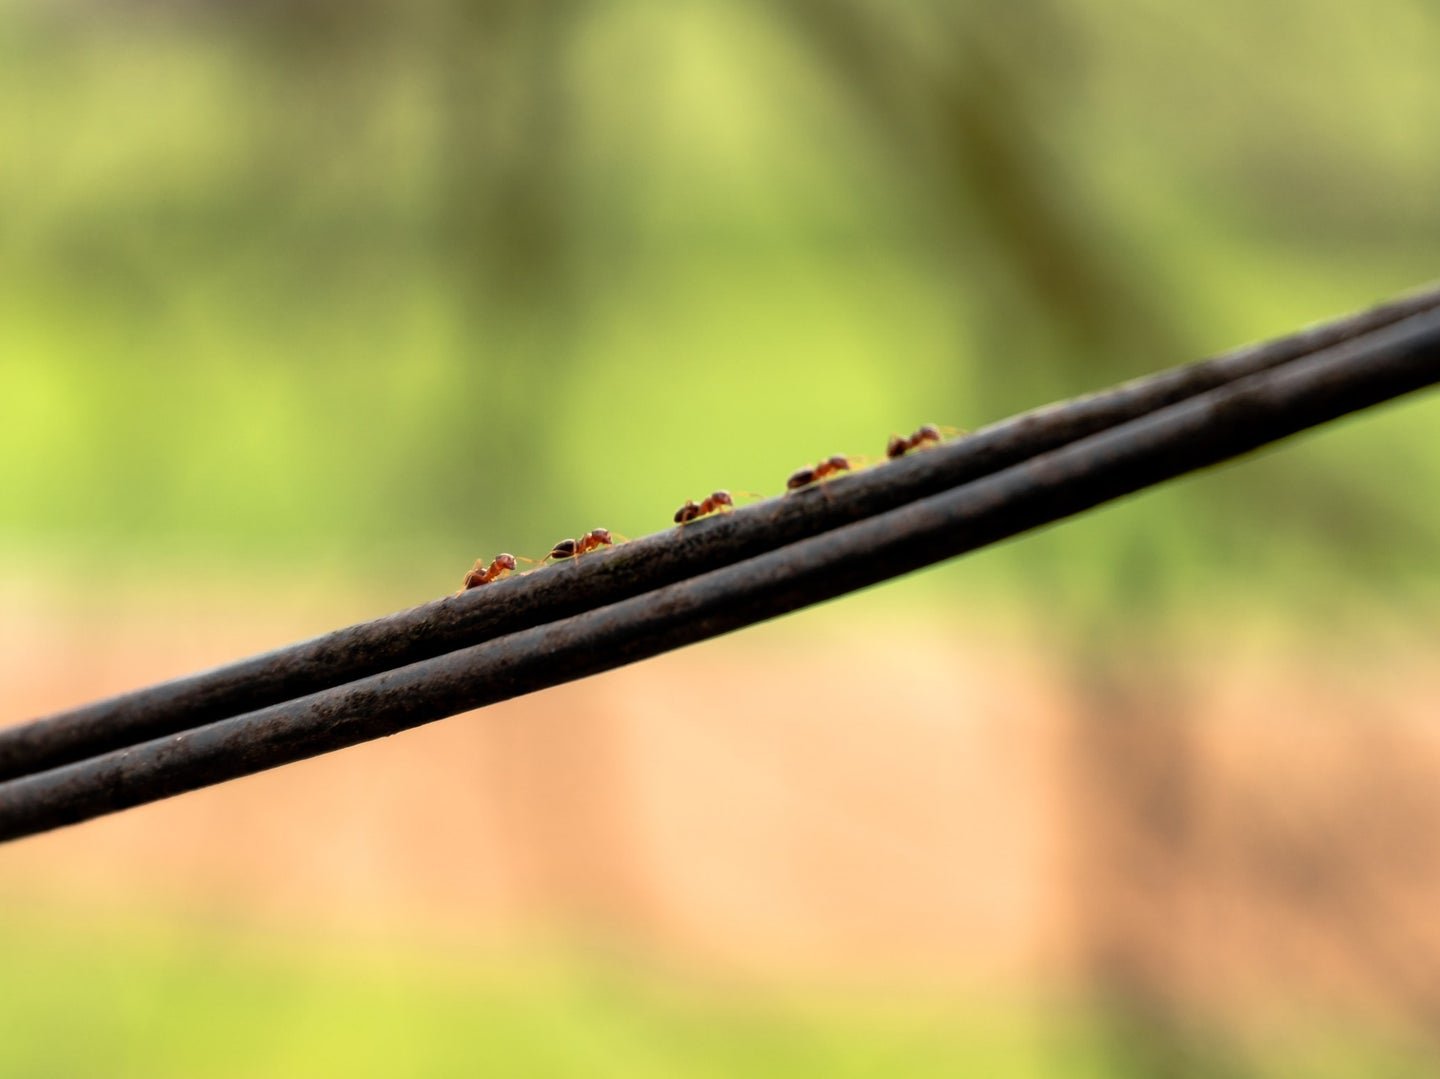 Fight ant infestations with these expert tips